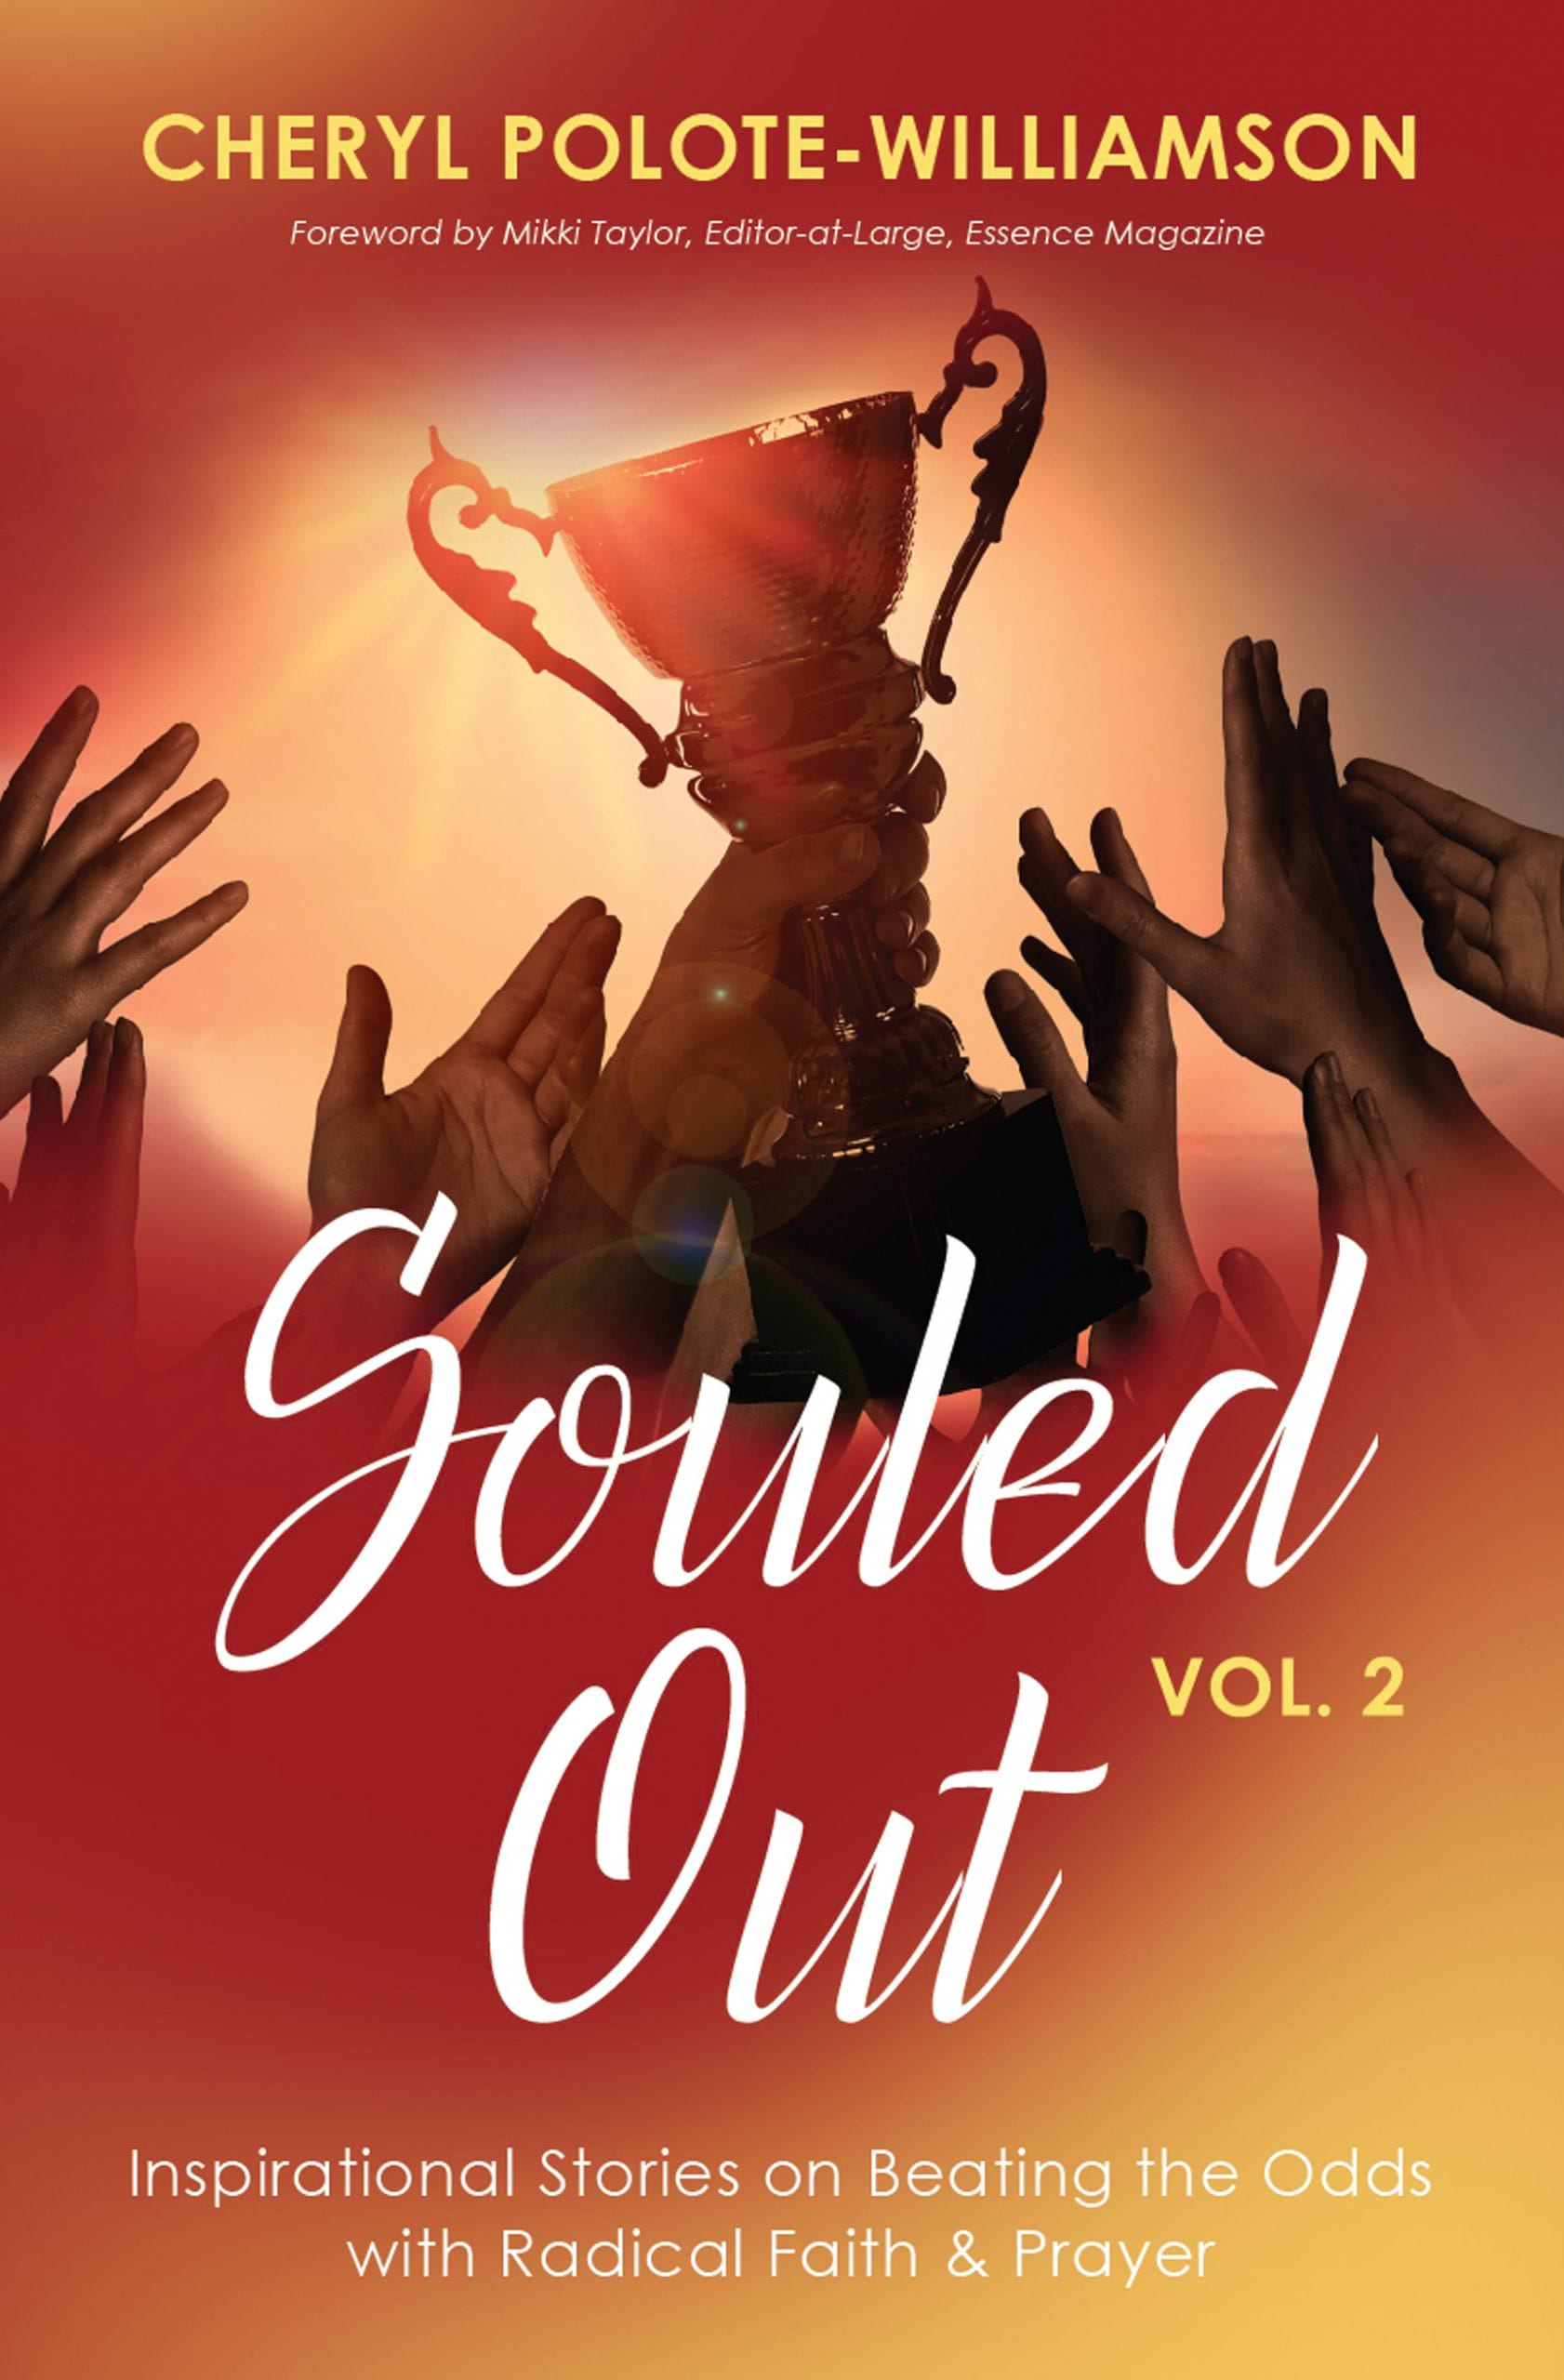 Souled Out Vol. 2